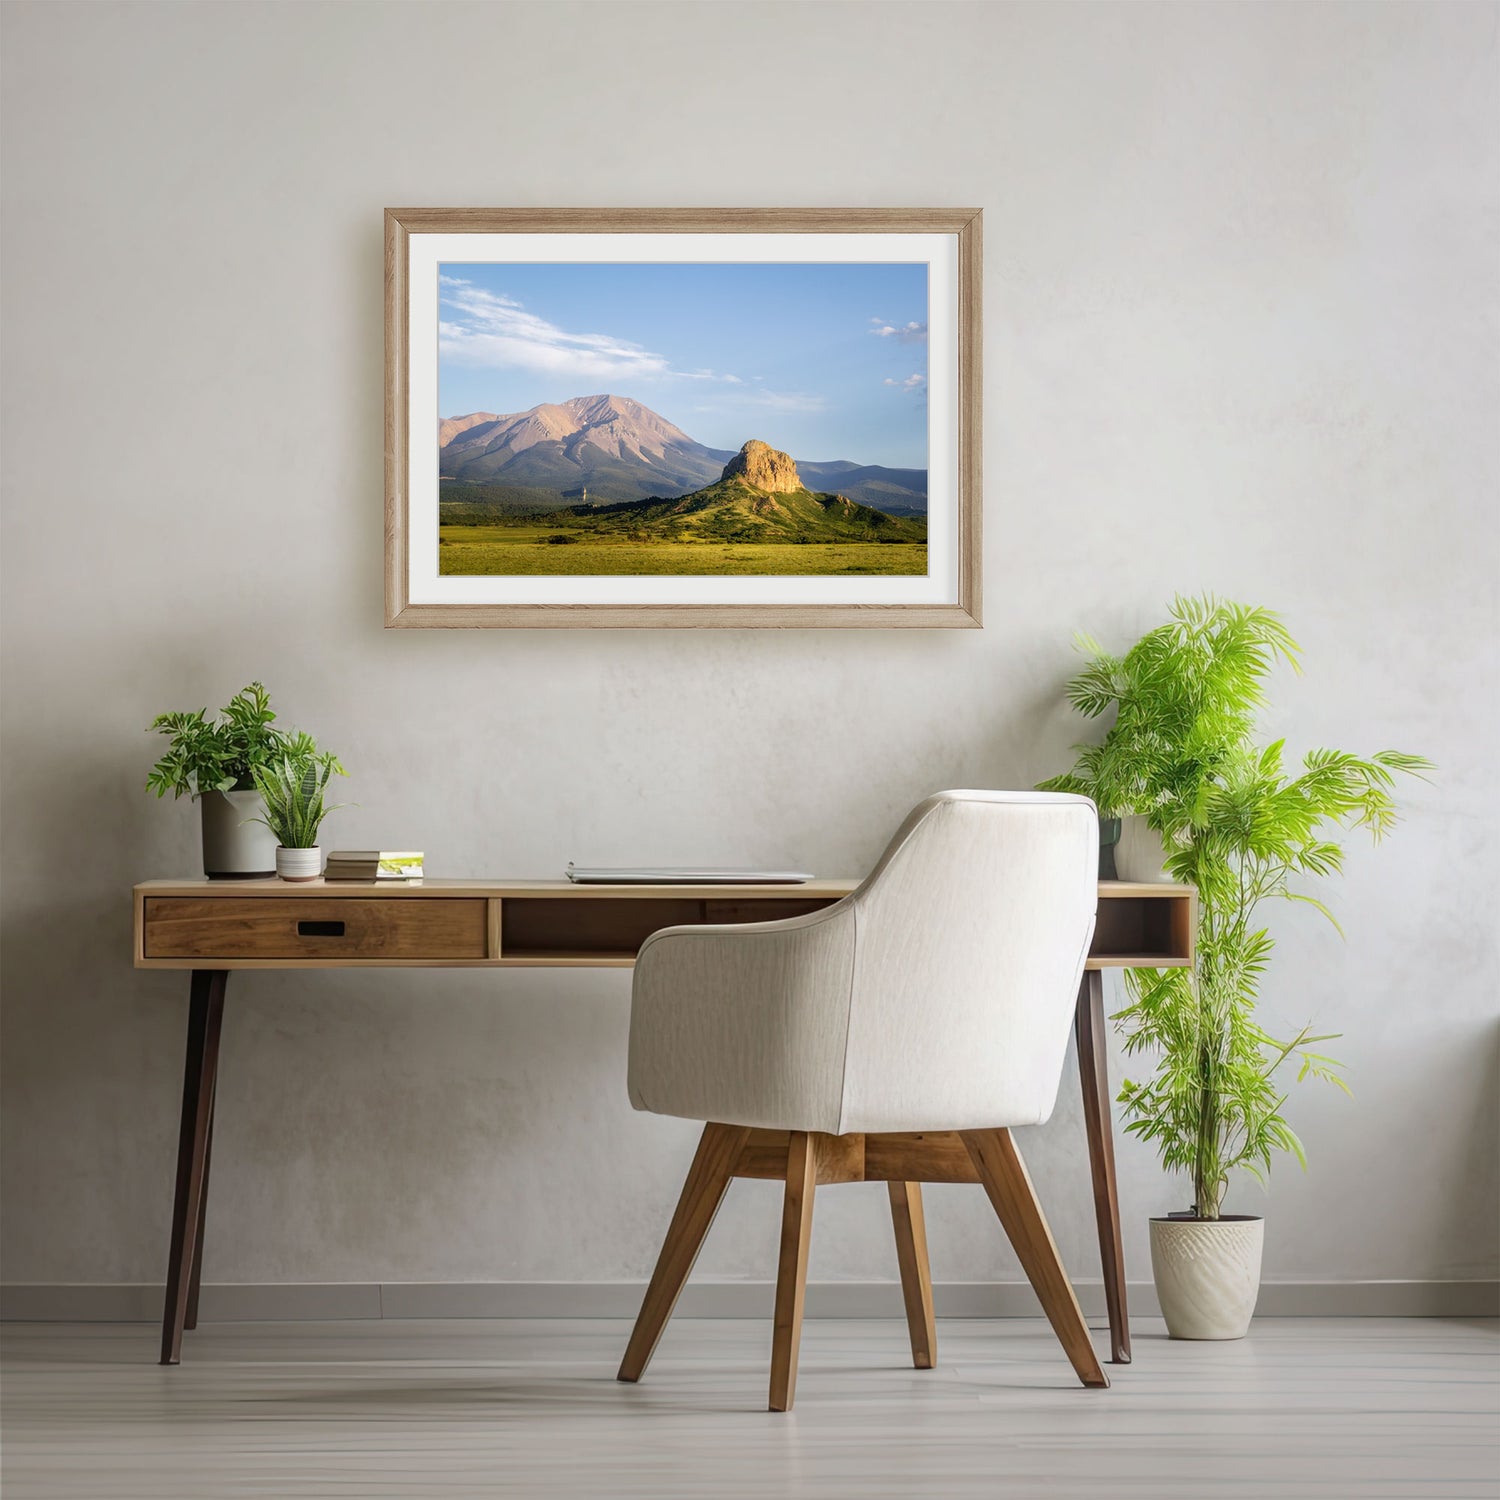 Wall art depicting the tranquil Colorado landscape, showcasing the vibrant colors and peaceful scenery of Goemmer Butte in a nature photography print.